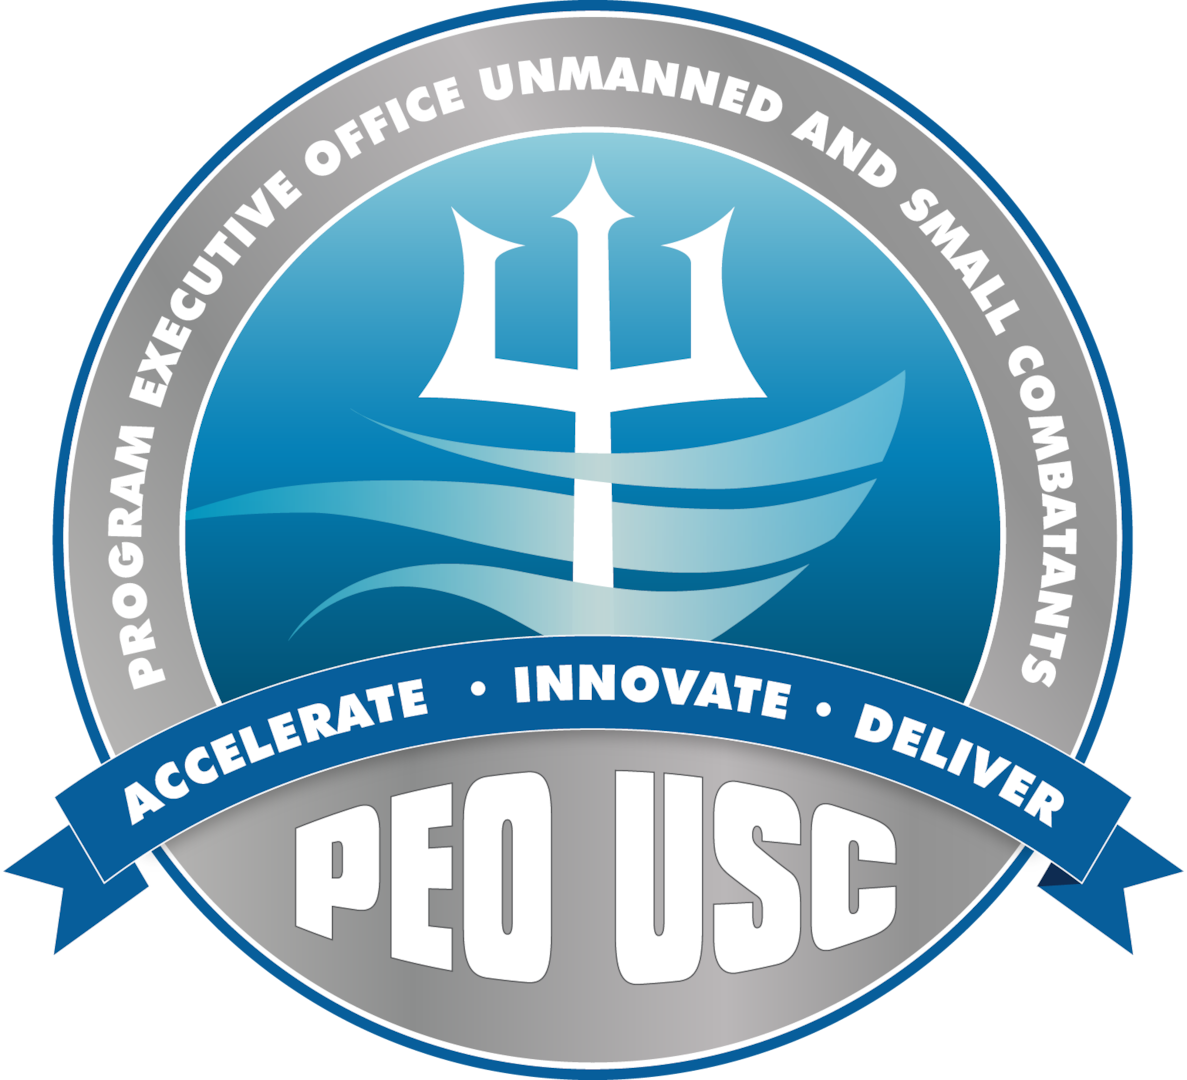 The Navy announced March 22, 2018, that it is renaming Program Executive Office Littoral Combat Ship (PEO LCS) as Program Executive Office, Unmanned and Small Combatants (PEO USC) to better align the course and scope of responsibilities for both manned and unmanned systems to meet combatant commander needs.